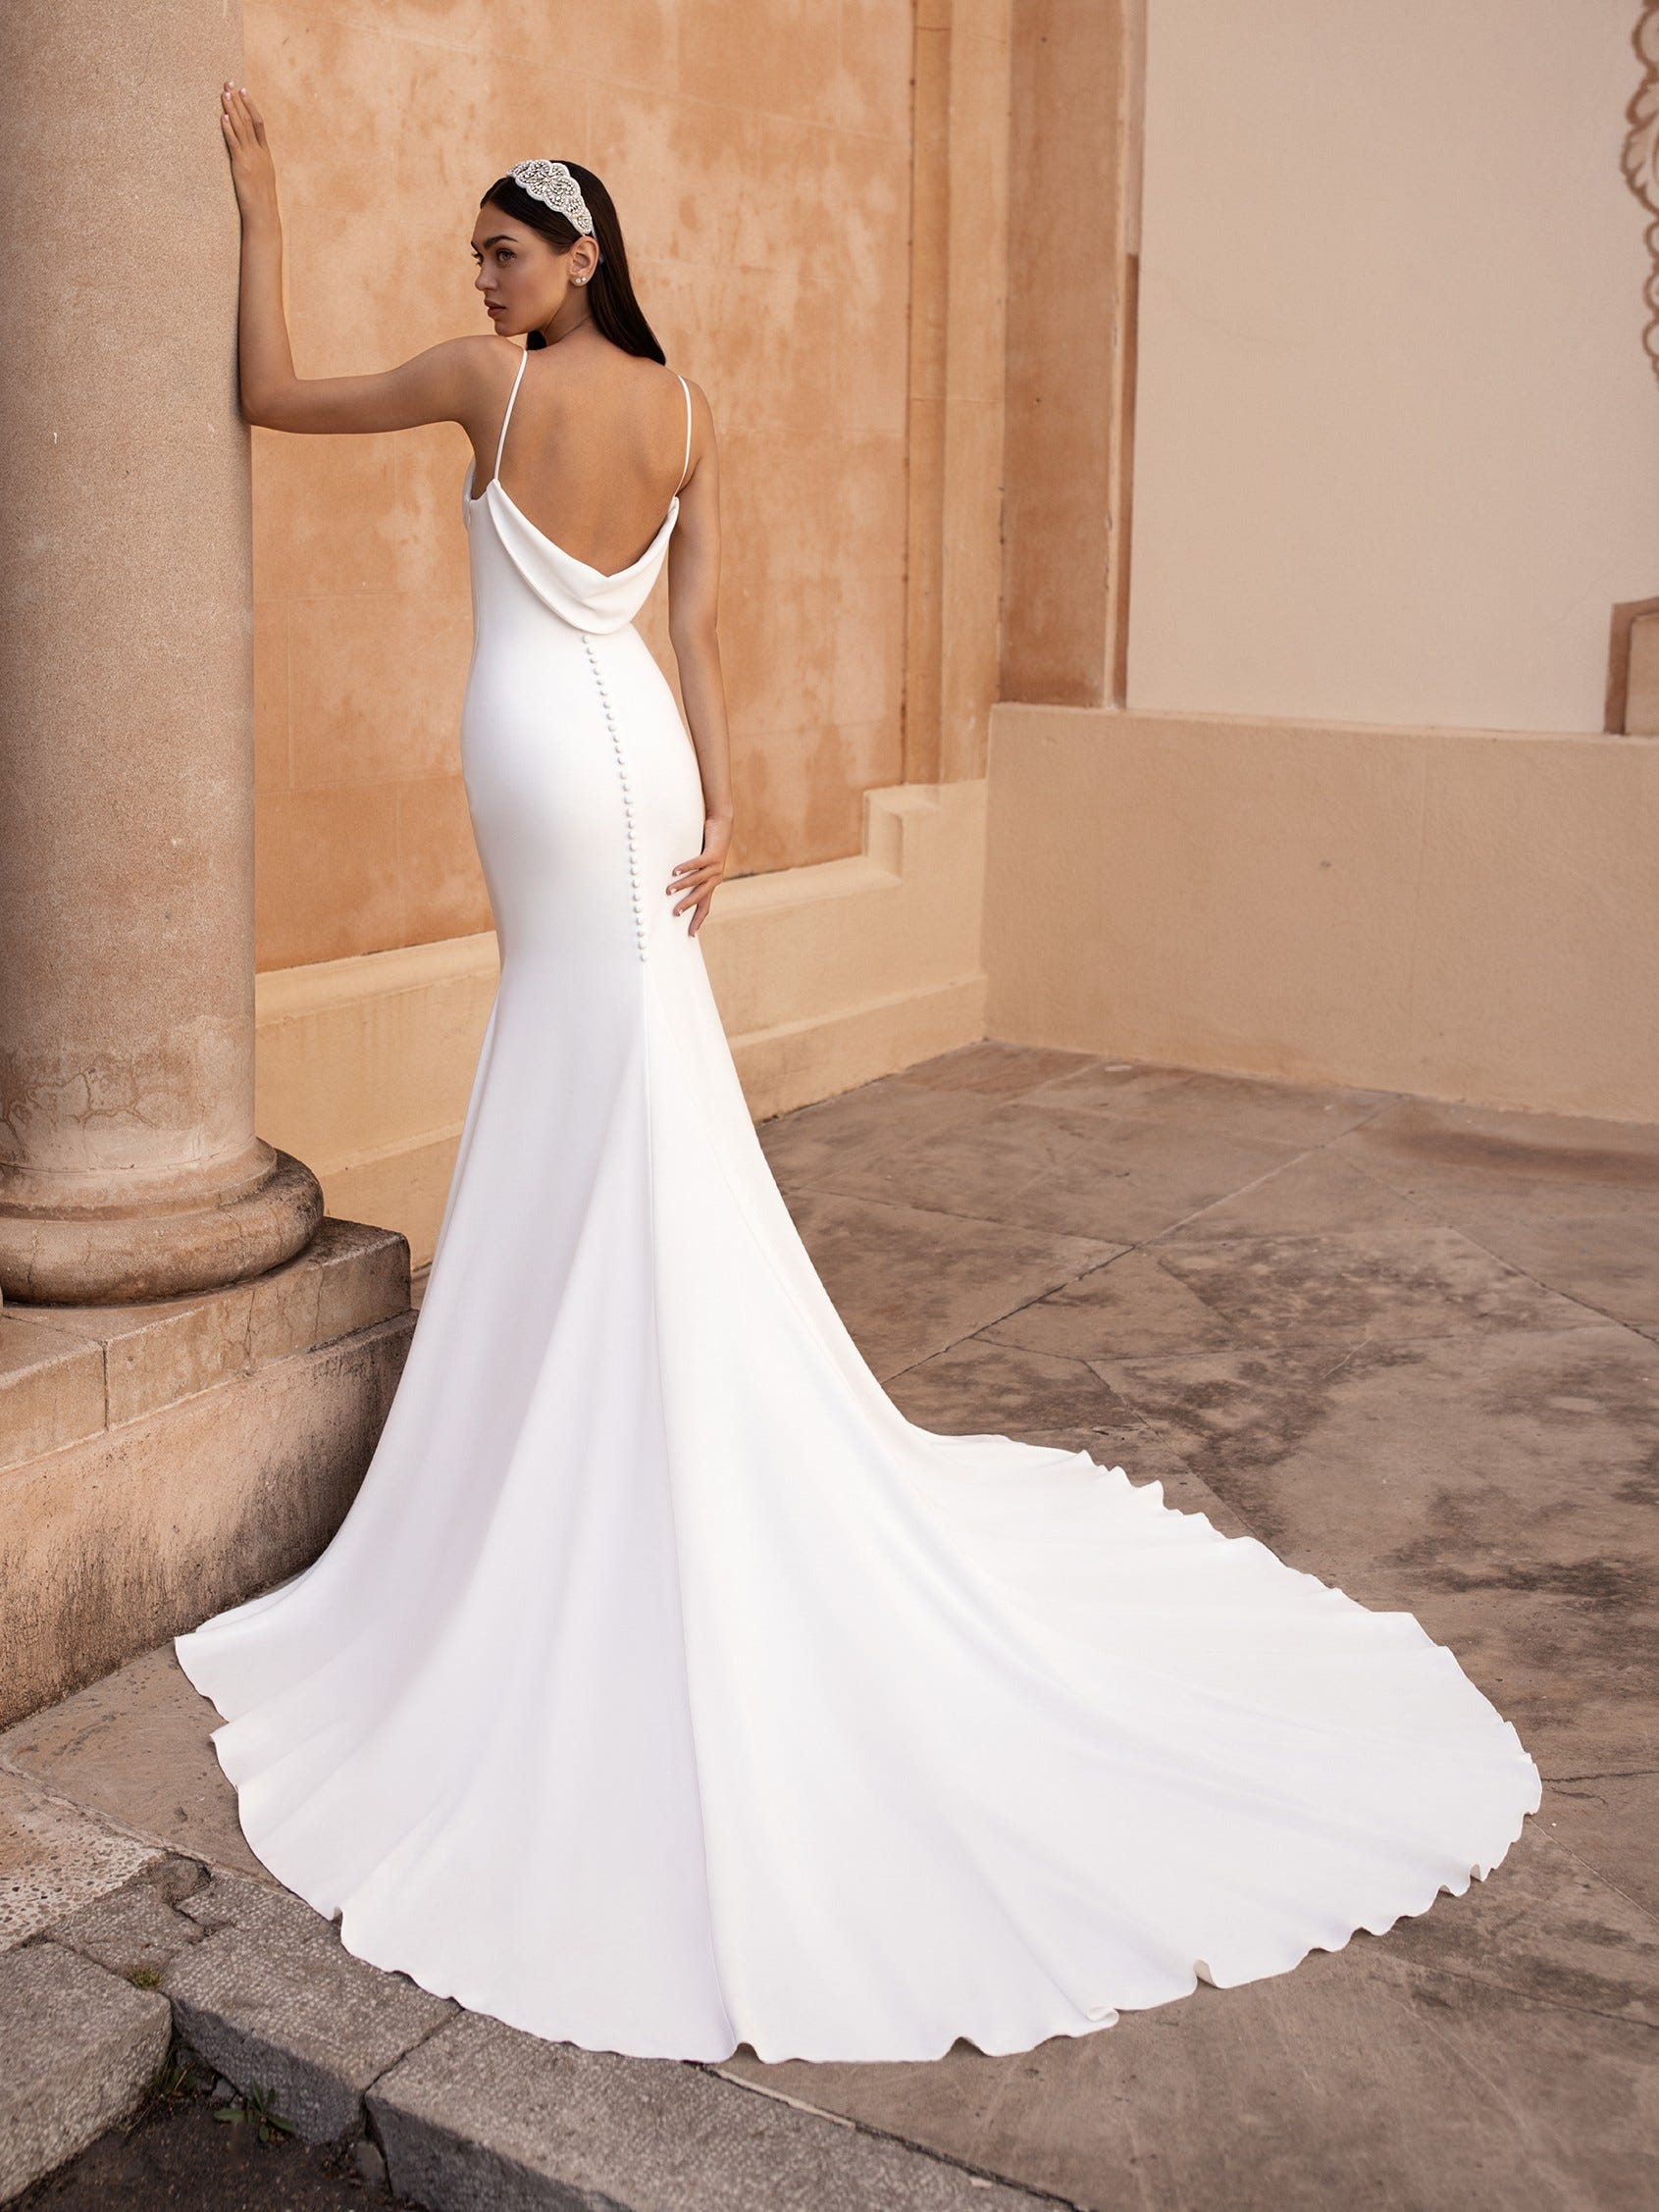 Backless Wedding Dress Trends To Inspire Brides